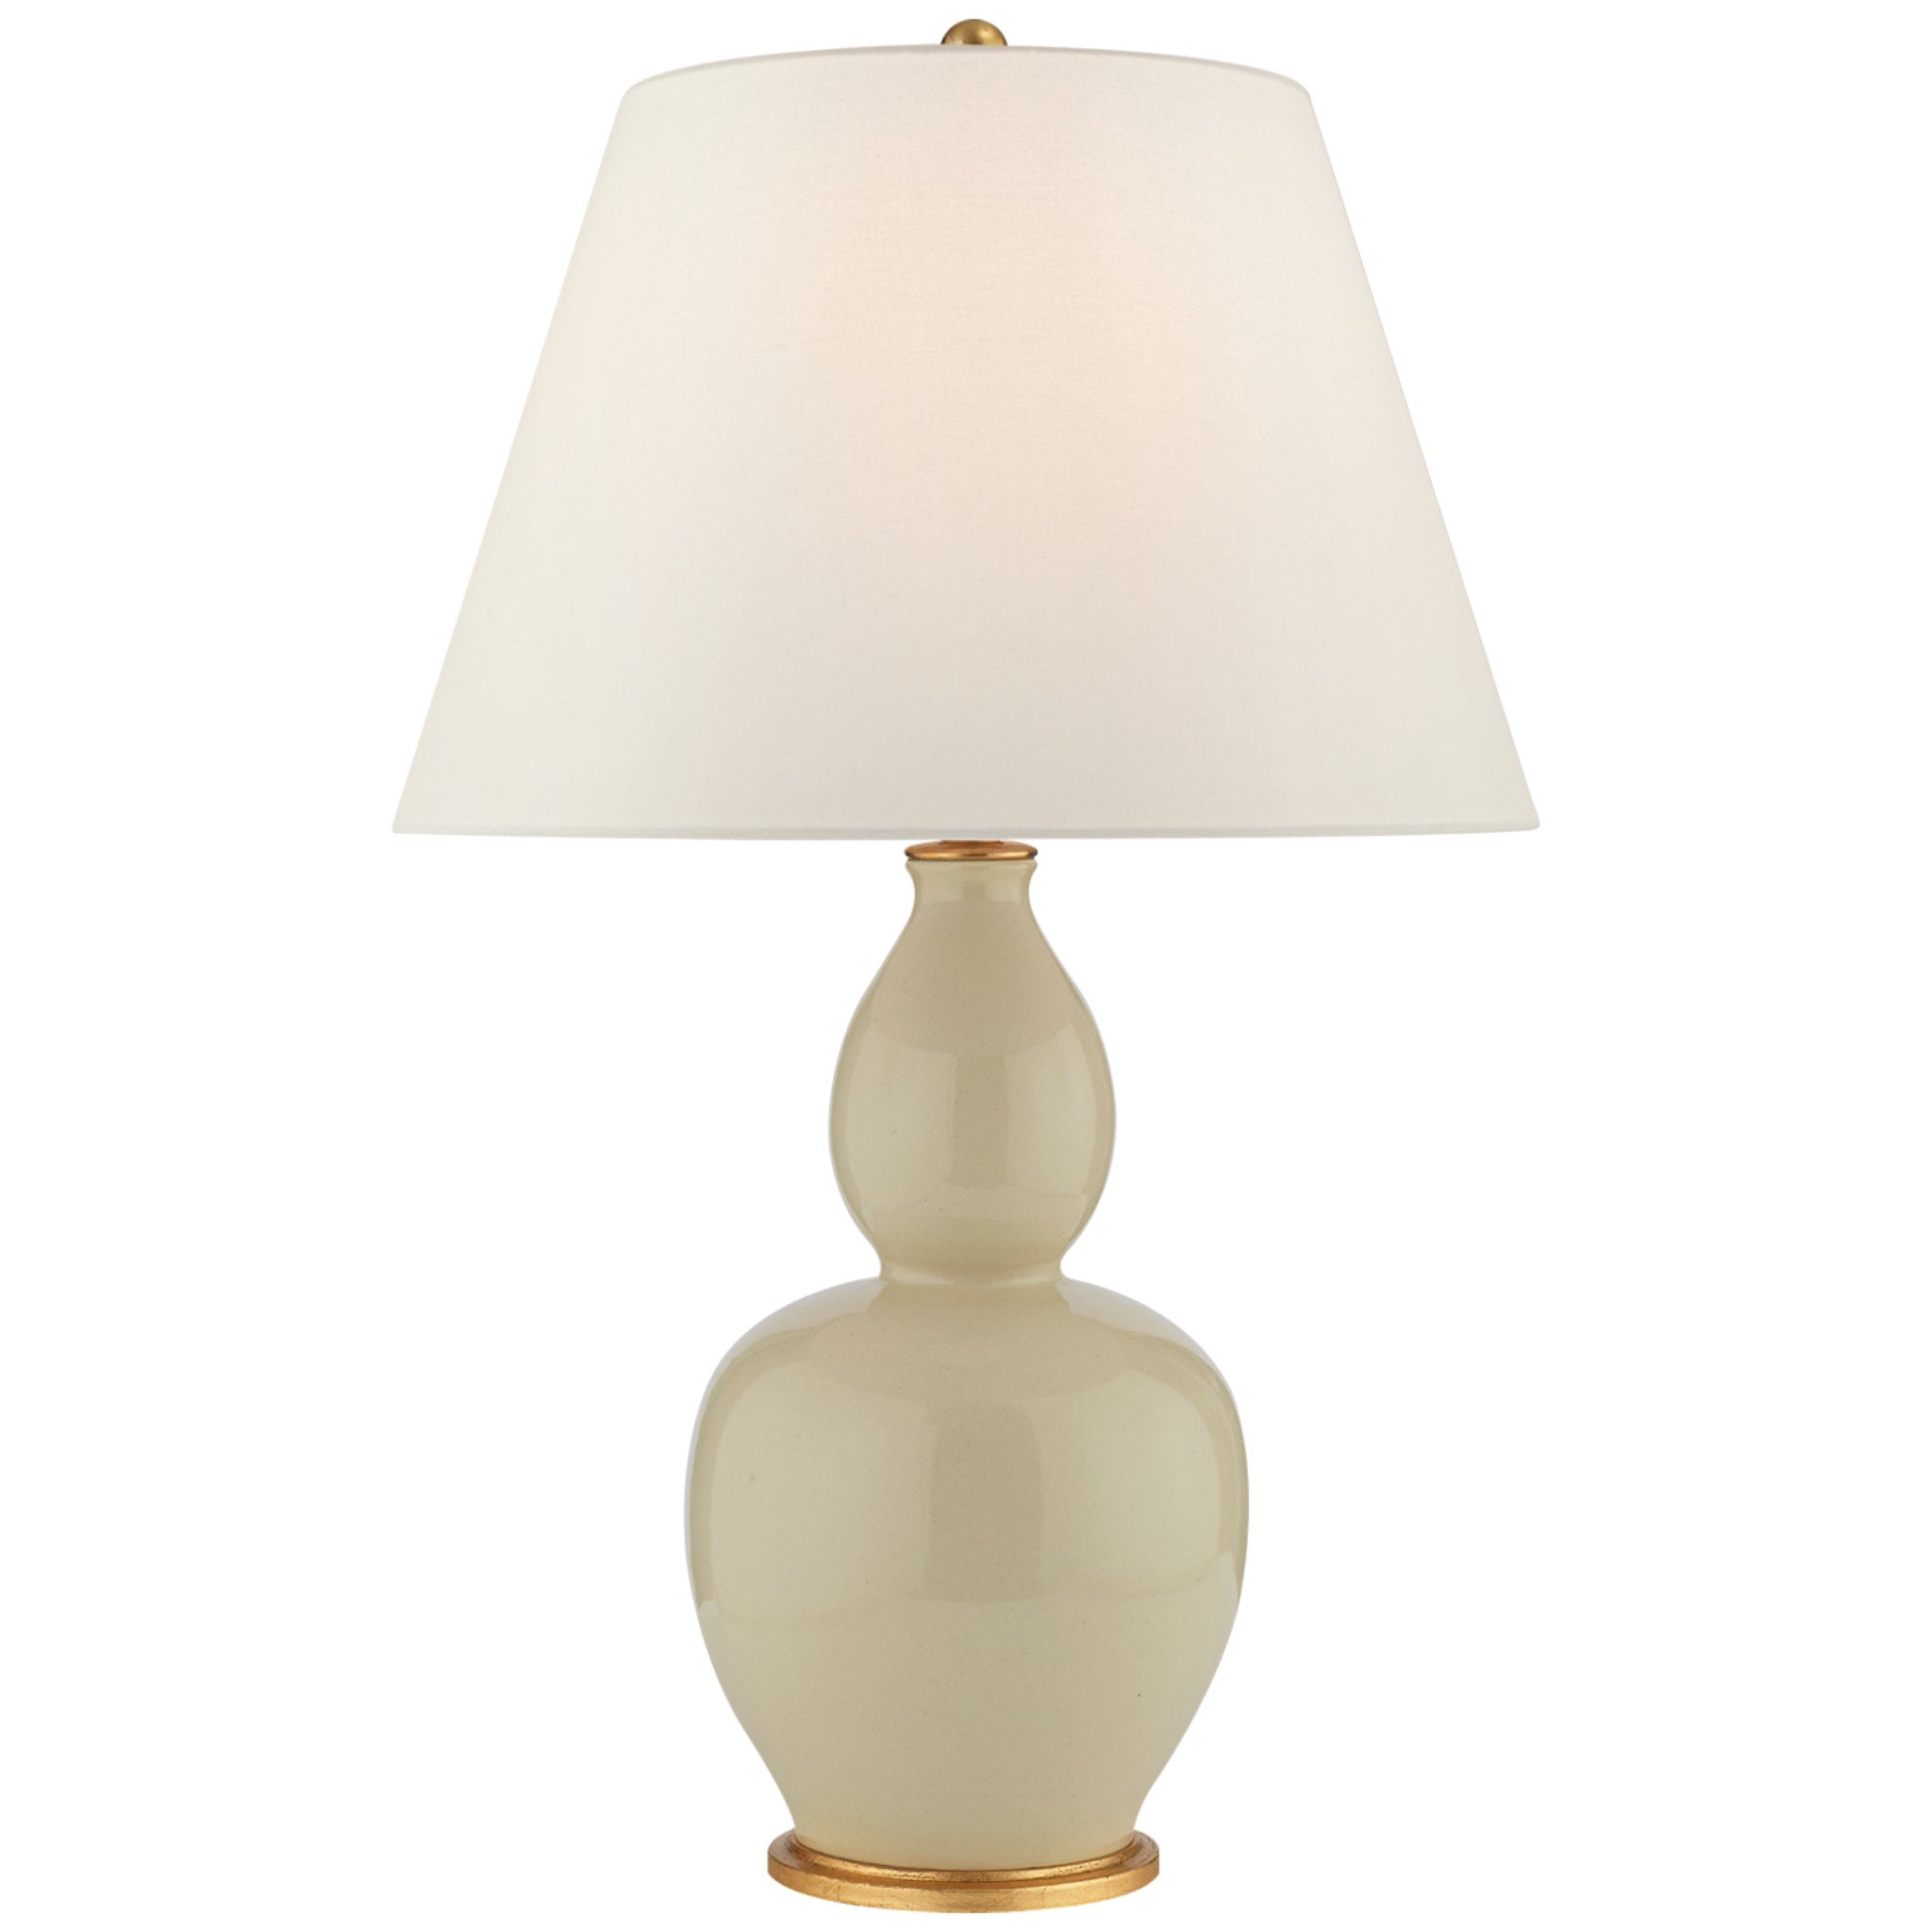 Chapman & Myers Yue Double Gourd Table Lamp in Coconut with Linen Shade